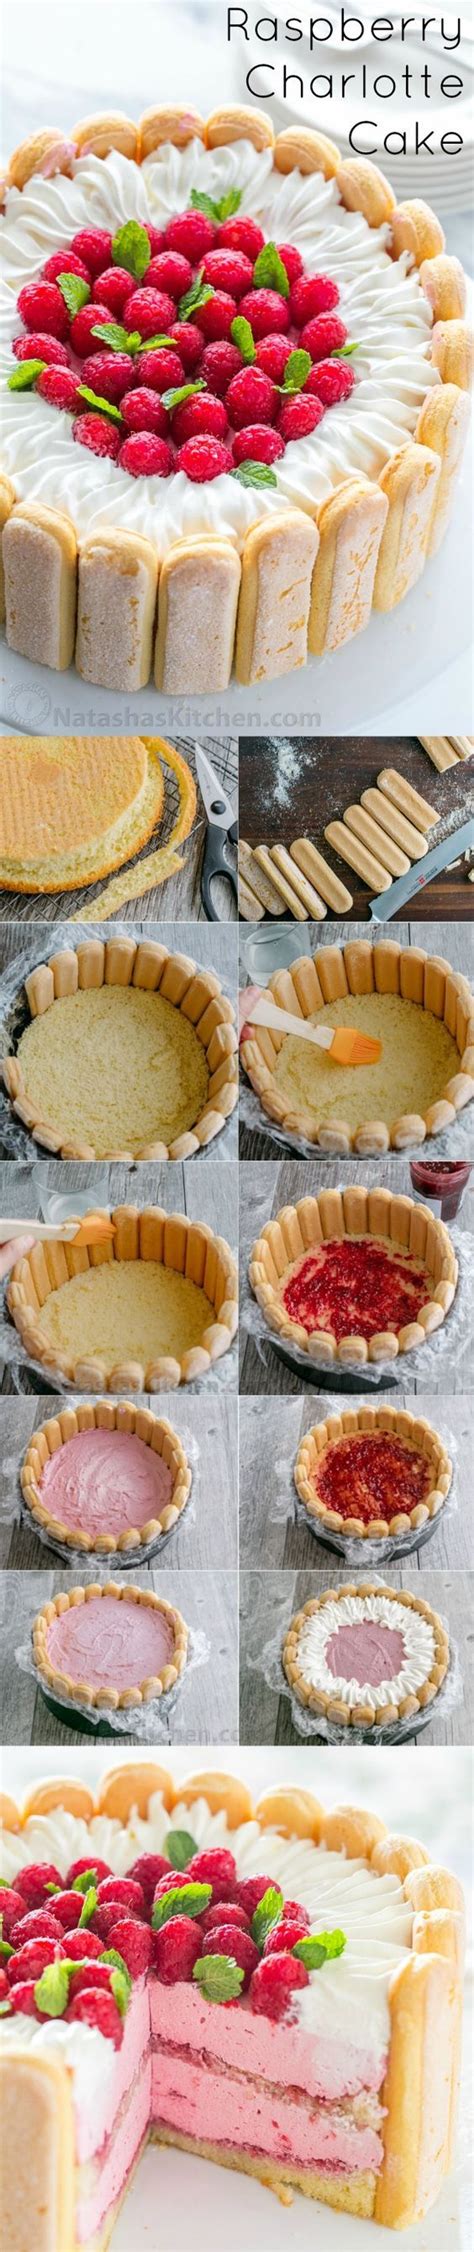 Lady fingers are used for sophisticated french or italian desserts. Check out Charlotte Cake Recipe with Raspberries. It's so ...